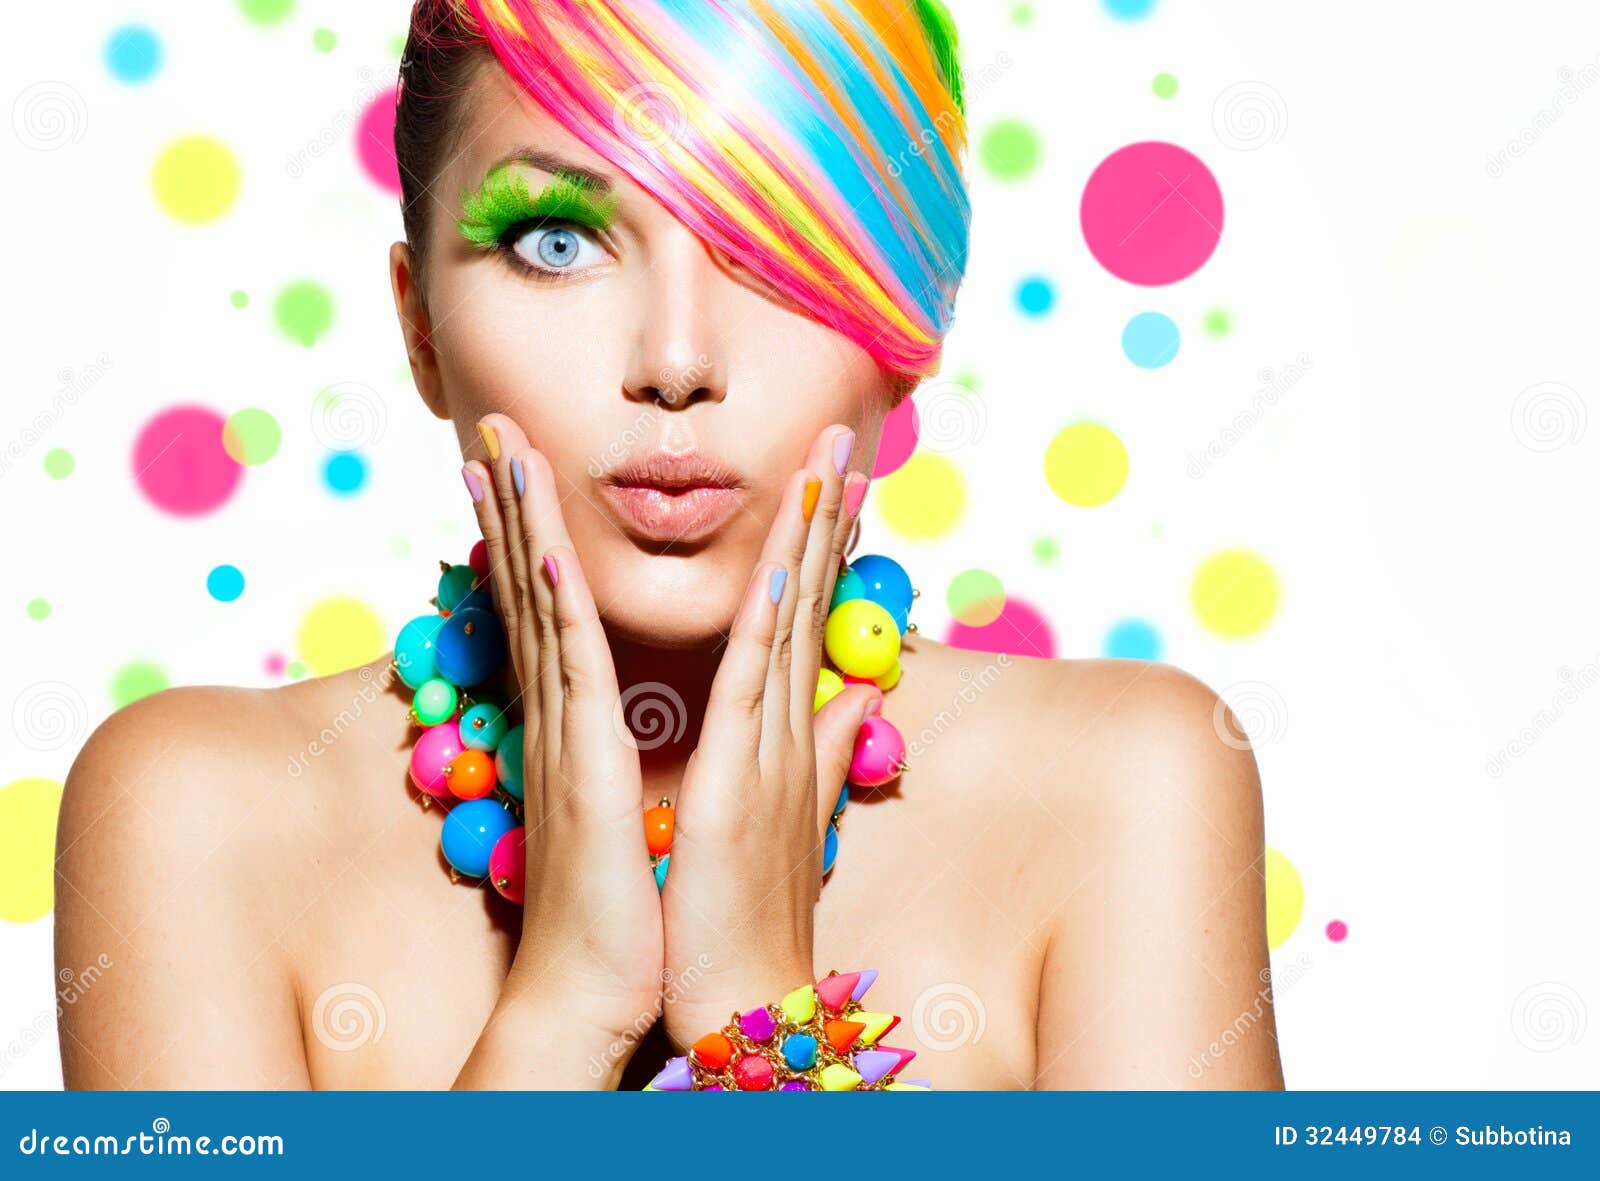 colorful makeup, hair and accessories